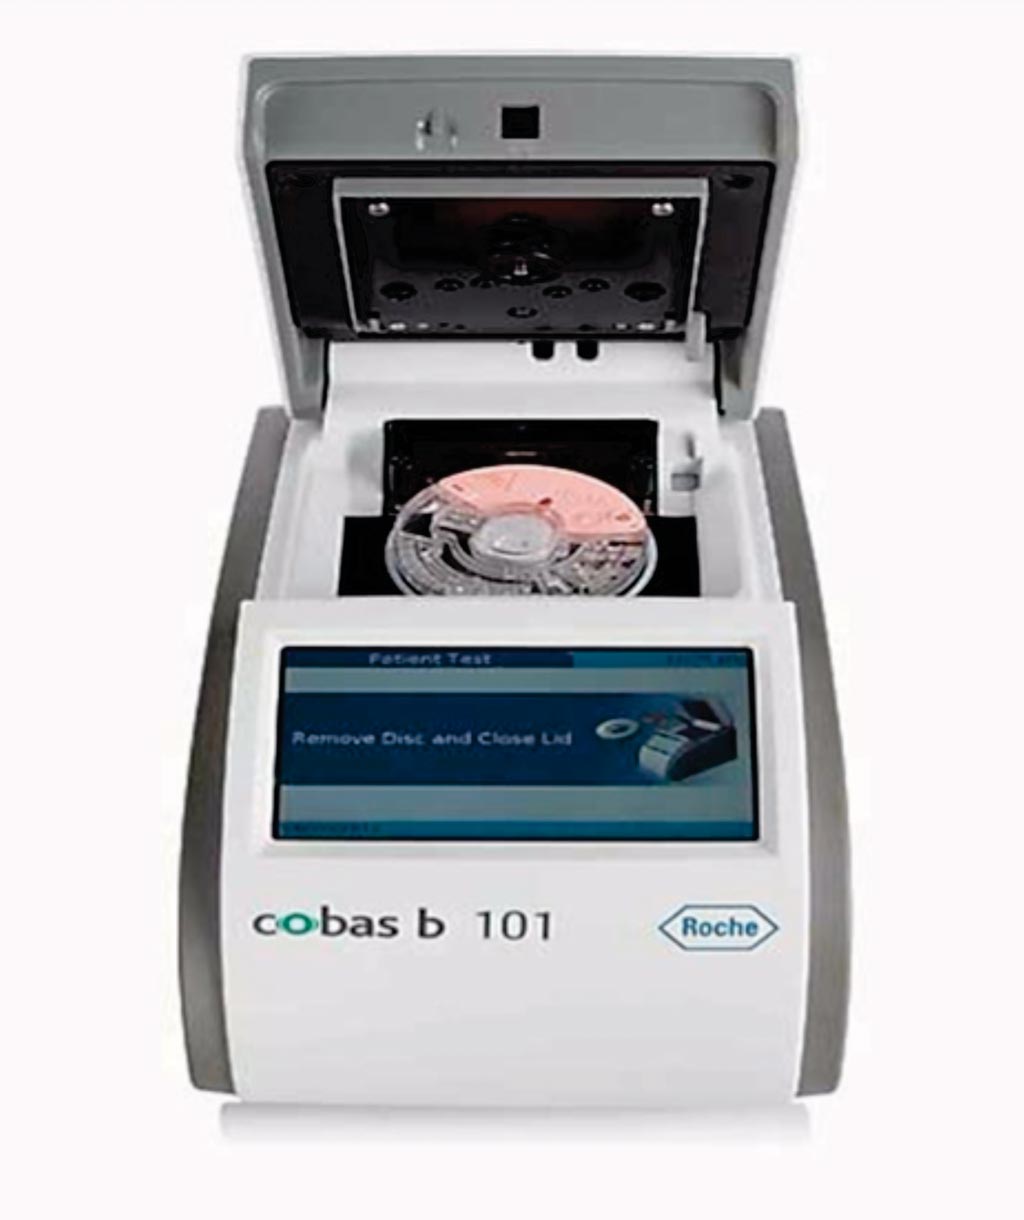 Image: The cobas b 101 POC system; an in vitro diagnostic (IVD) test system offering C-reactive protein, HbA1c and a complete lipid profile (CHOL, HDL, LDL, TG) on one device at the point of care (Photo courtesy of Roche Diagnostics).